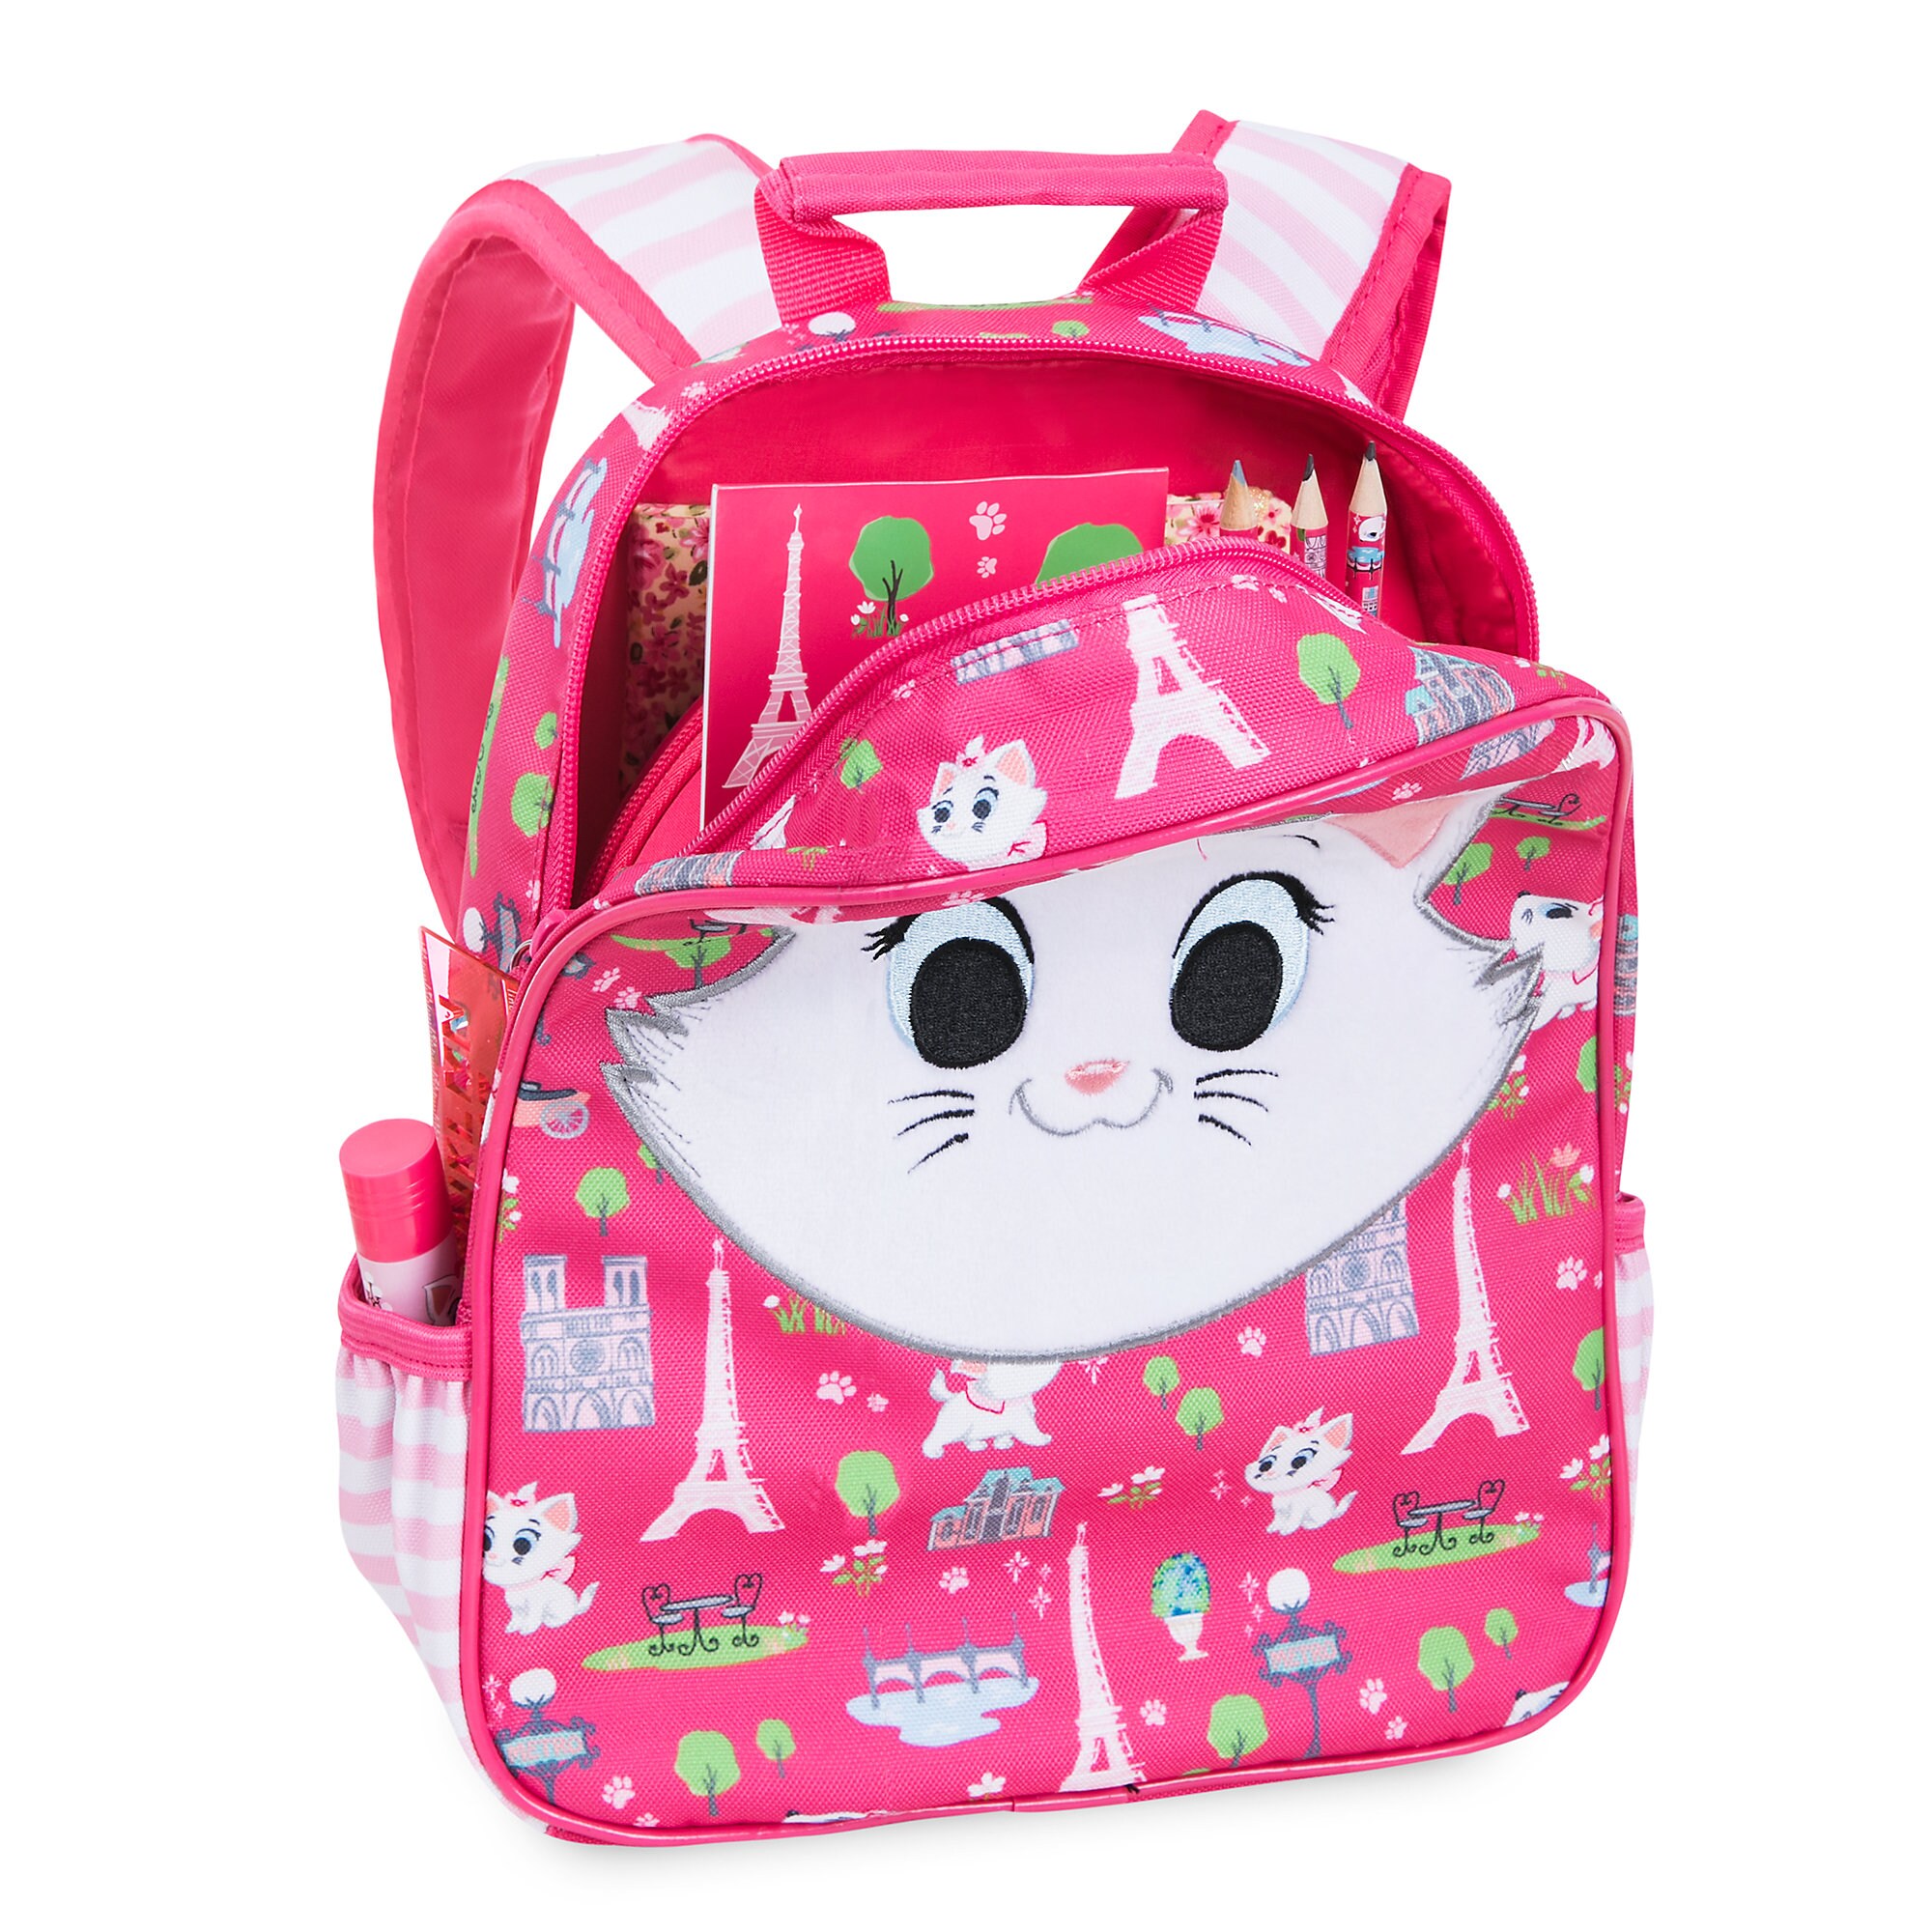 Marie Backpack for Kids - Personalized